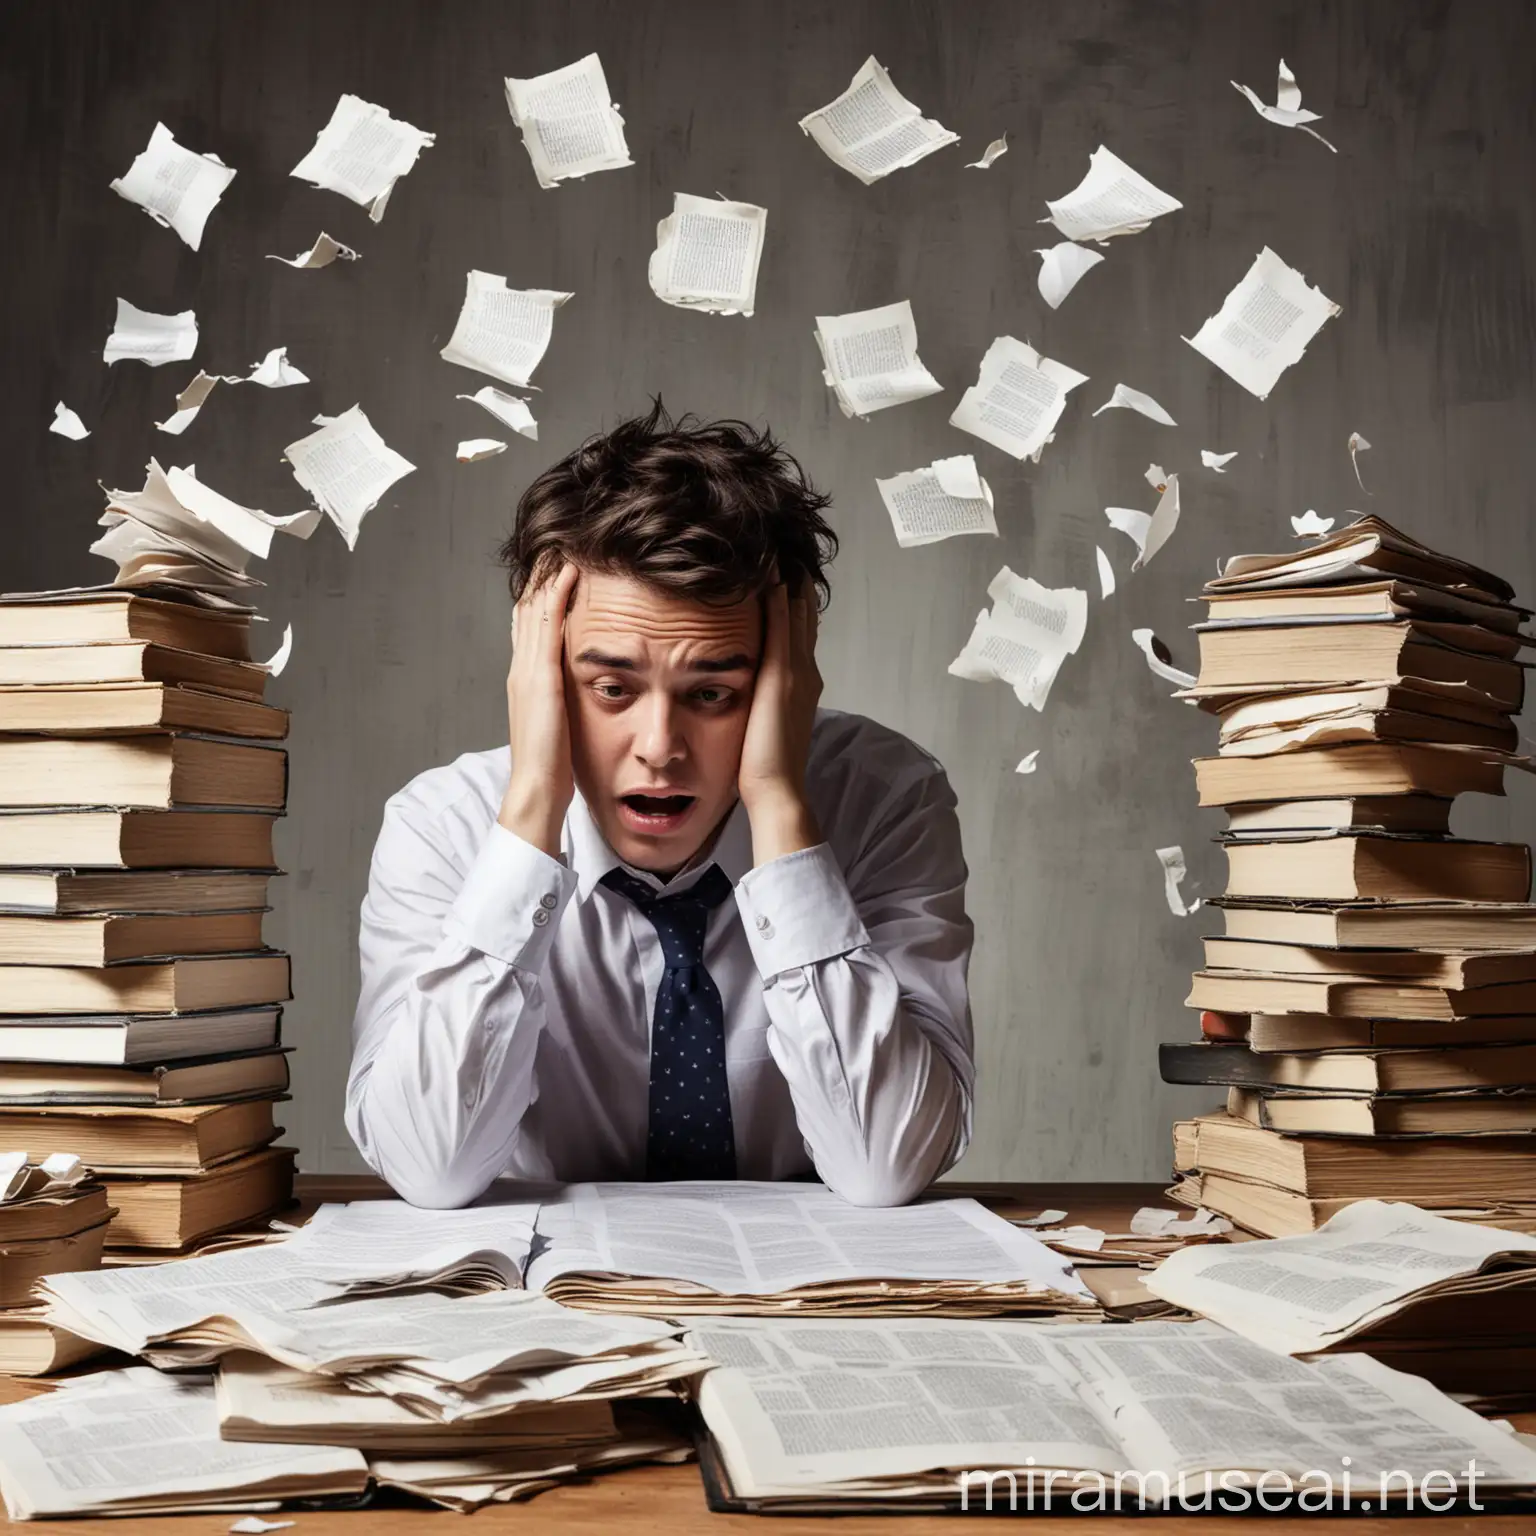 A person sitting at a desk with their head in their hands - Books and papers scattered around, showing the frustration and overwhelming feeling that can accompany learning.